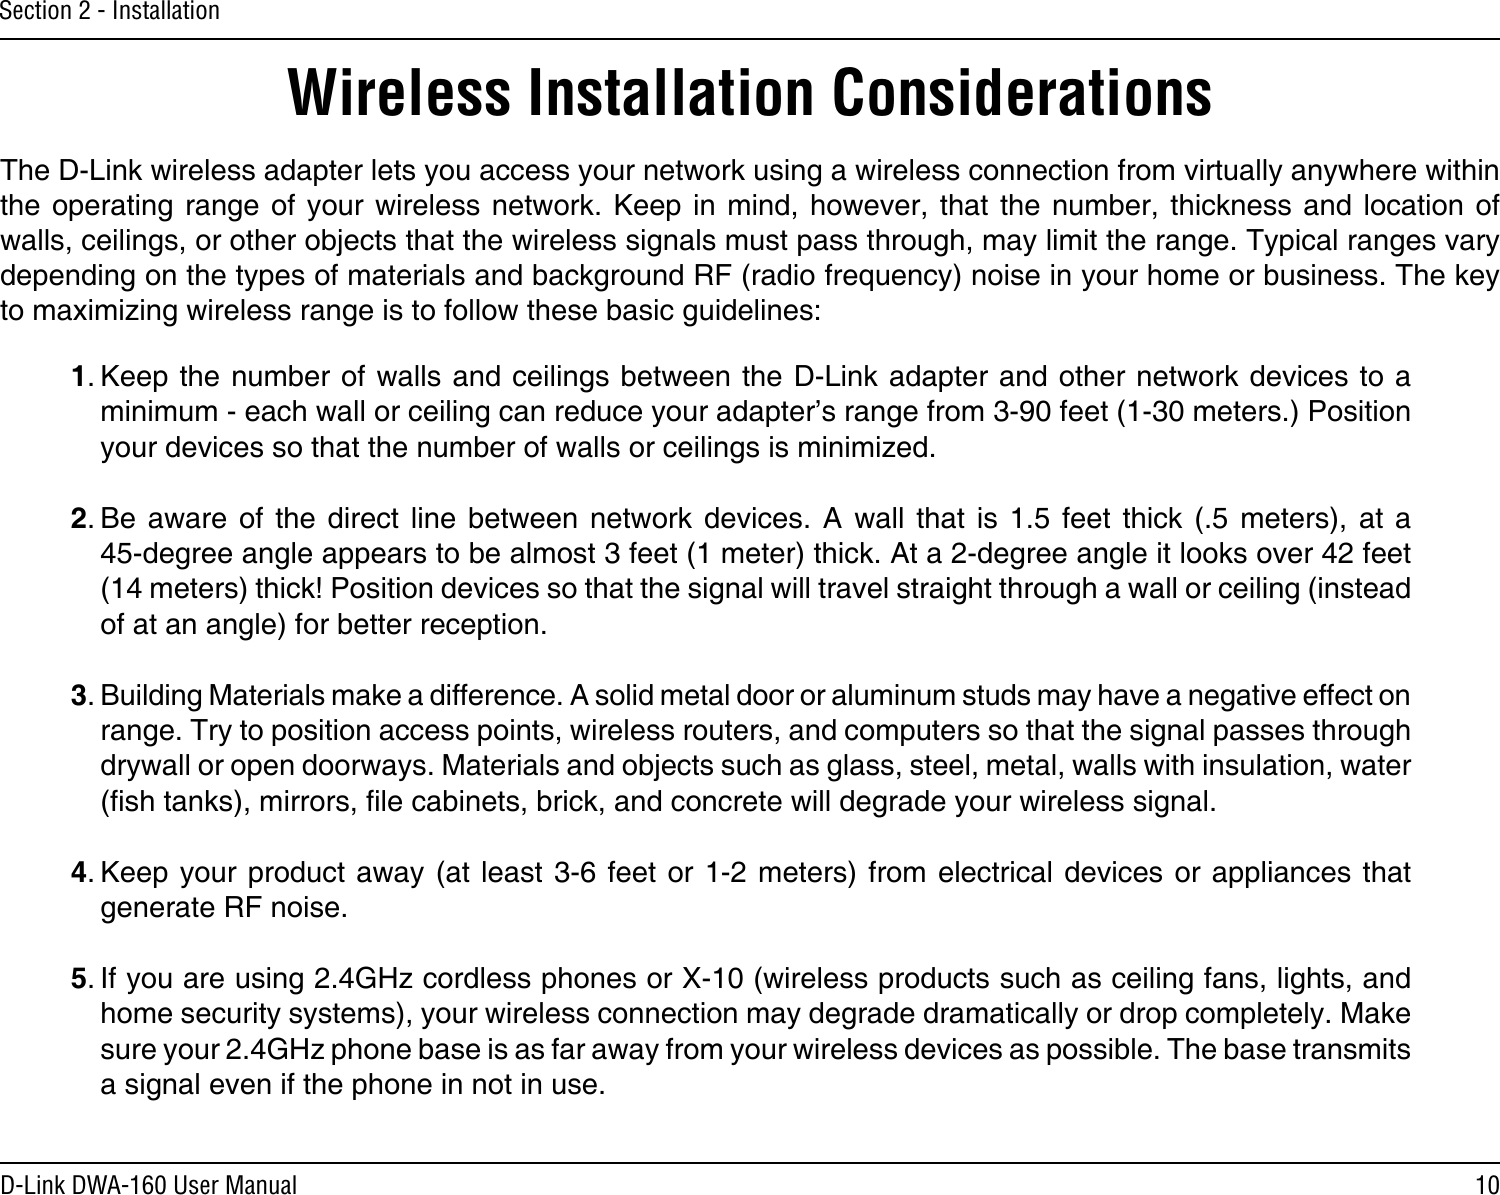 10D-Link DWA-160 User ManualSection 2 - InstallationWireless Installation ConsiderationsThe D-Link wireless adapter lets you access your network using a wireless connection from virtually anywhere within the operating range of  your  wireless  network. Keep in mind,  however,  that  the number, thickness and  location  of walls, ceilings, or other objects that the wireless signals must pass through, may limit the range. Typical ranges vary depending on the types of materials and background RF (radio frequency) noise in your home or business. The key to maximizing wireless range is to follow these basic guidelines:1. Keep the number  of walls and ceilings between the D-Link adapter and other network devices to a minimum - each wall or ceiling can reduce your adapter’s range from 3-90 feet (1-30 meters.) Position your devices so that the number of walls or ceilings is minimized.2. Be aware  of  the  direct  line  between  network  devices.  A  wall  that  is  1.5  feet  thick  (.5  meters),  at  a   45-degree angle appears to be almost 3 feet (1 meter) thick. At a 2-degree angle it looks over 42 feet (14 meters) thick! Position devices so that the signal will travel straight through a wall or ceiling (instead of at an angle) for better reception.3. Building Materials make a difference. A solid metal door or aluminum studs may have a negative effect on range. Try to position access points, wireless routers, and computers so that the signal passes through drywall or open doorways. Materials and objects such as glass, steel, metal, walls with insulation, water (sh tanks), mirrors, le cabinets, brick, and concrete will degrade your wireless signal.4. Keep your  product away (at  least 3-6 feet  or 1-2 meters)  from electrical devices  or appliances that generate RF noise.5. If you are using 2.4GHz cordless phones or X-10 (wireless products such as ceiling fans, lights, and home security systems), your wireless connection may degrade dramatically or drop completely. Make sure your 2.4GHz phone base is as far away from your wireless devices as possible. The base transmits a signal even if the phone in not in use.